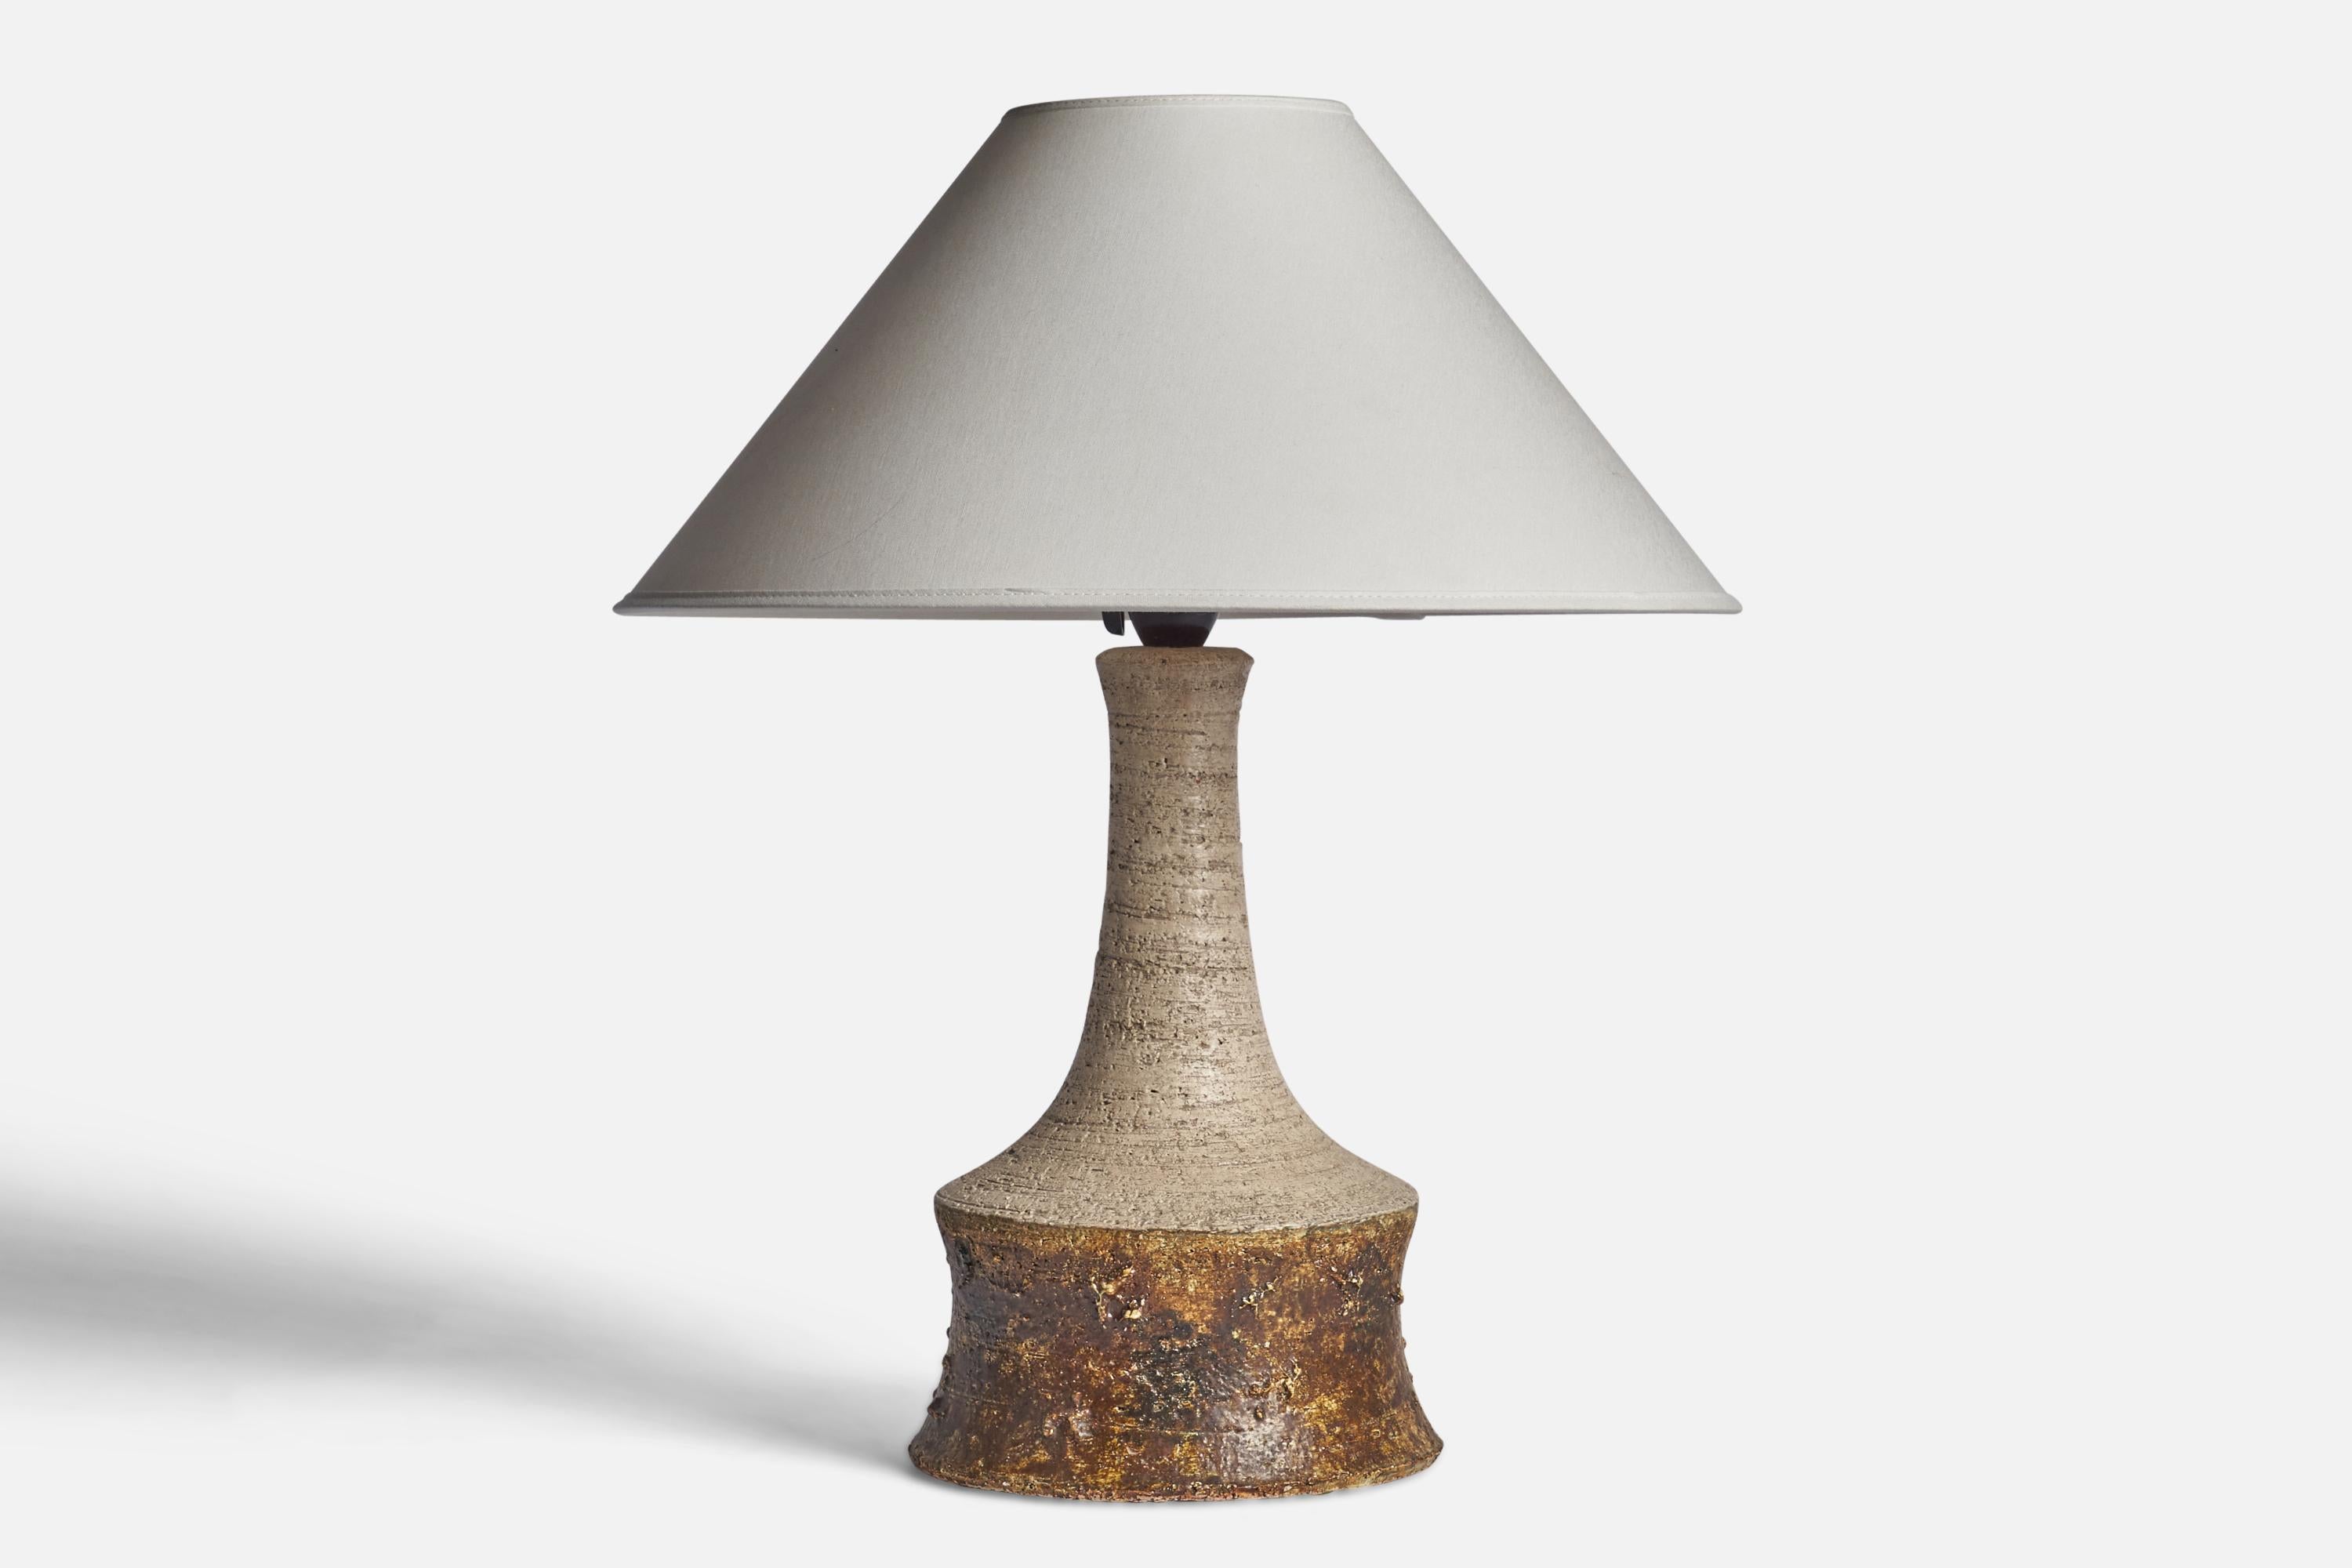 A light grey and brown-glazed stoneware table lamp designed and produced in Denmark, 1960s.

Dimensions of Lamp (inches): 14.75” H x 7.5” Diameter
Dimensions of Shade (inches): 4.5” Top Diameter x 16” Bottom Diameter x 7.25” H
Dimensions of Lamp